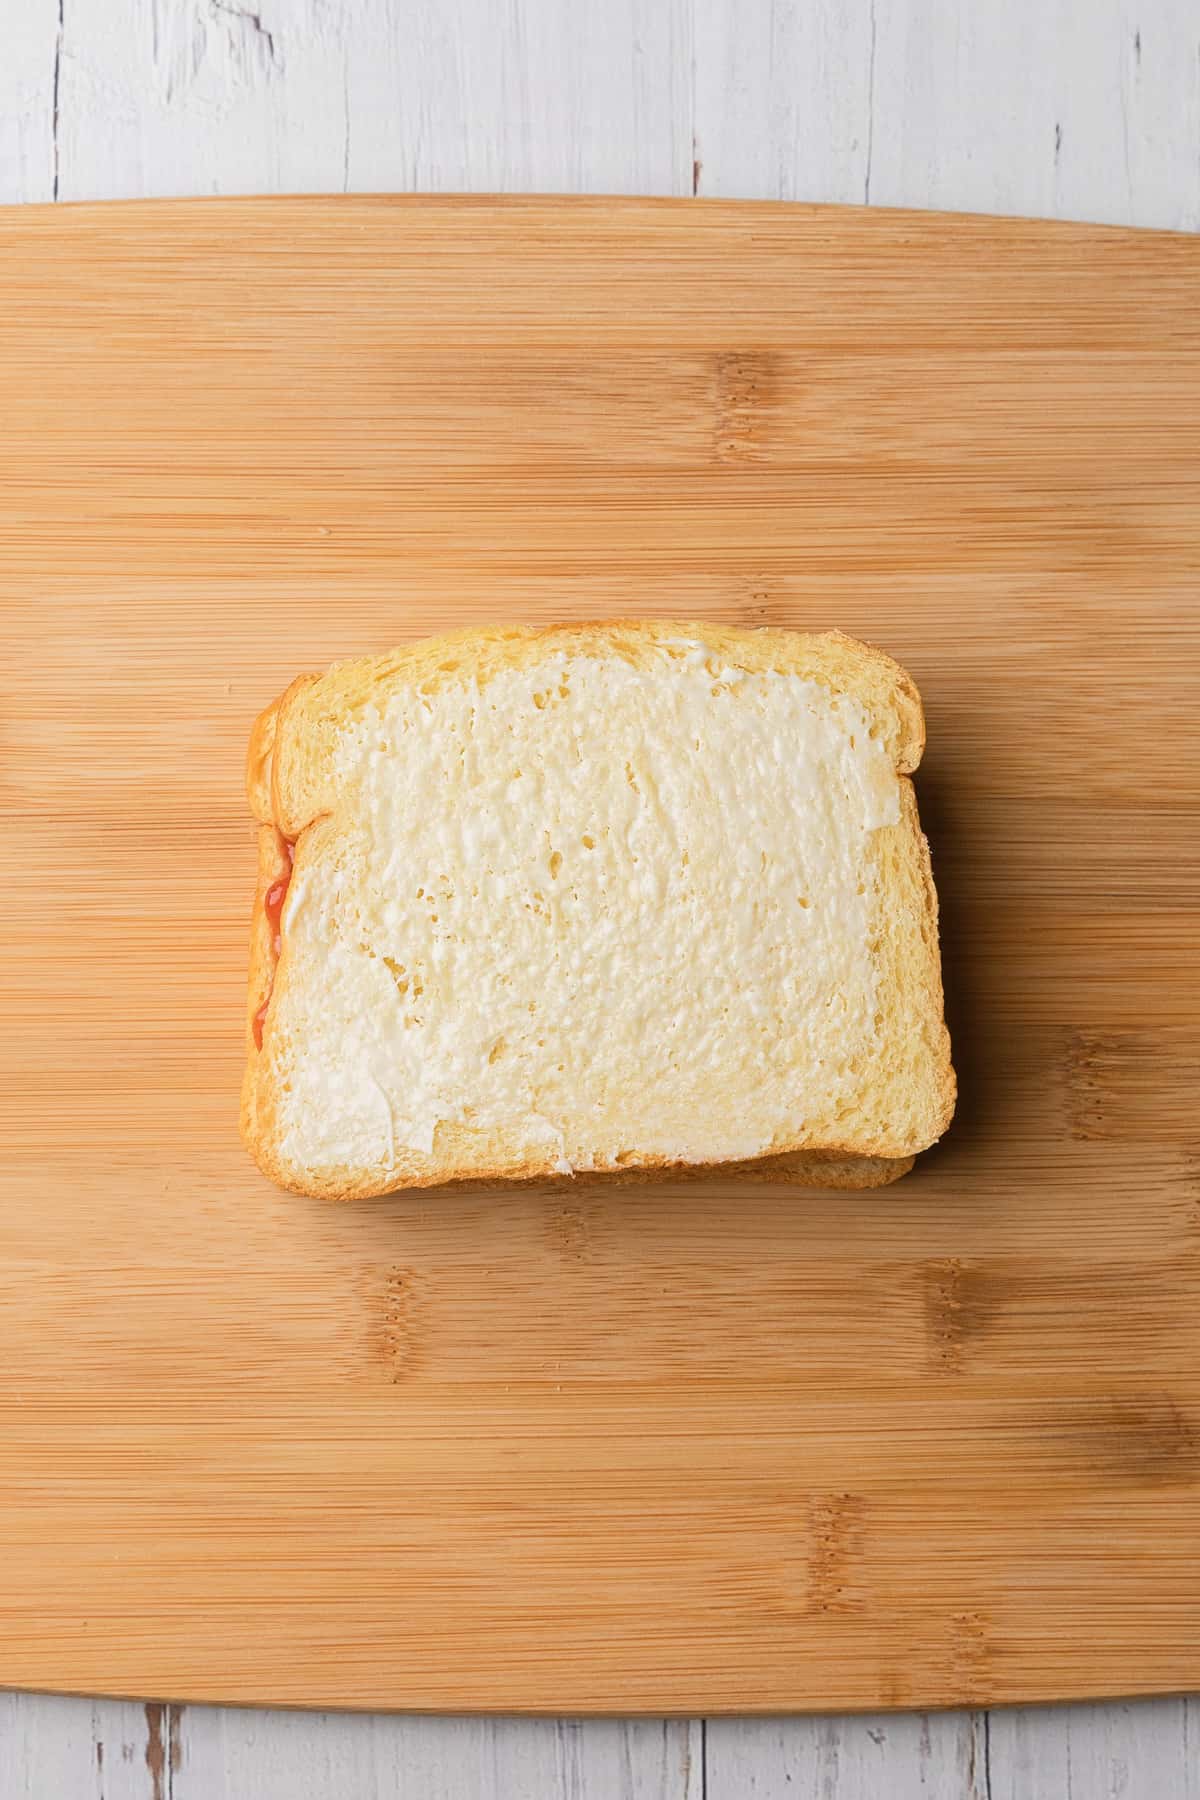 Butter spread on the outside of the pbj.